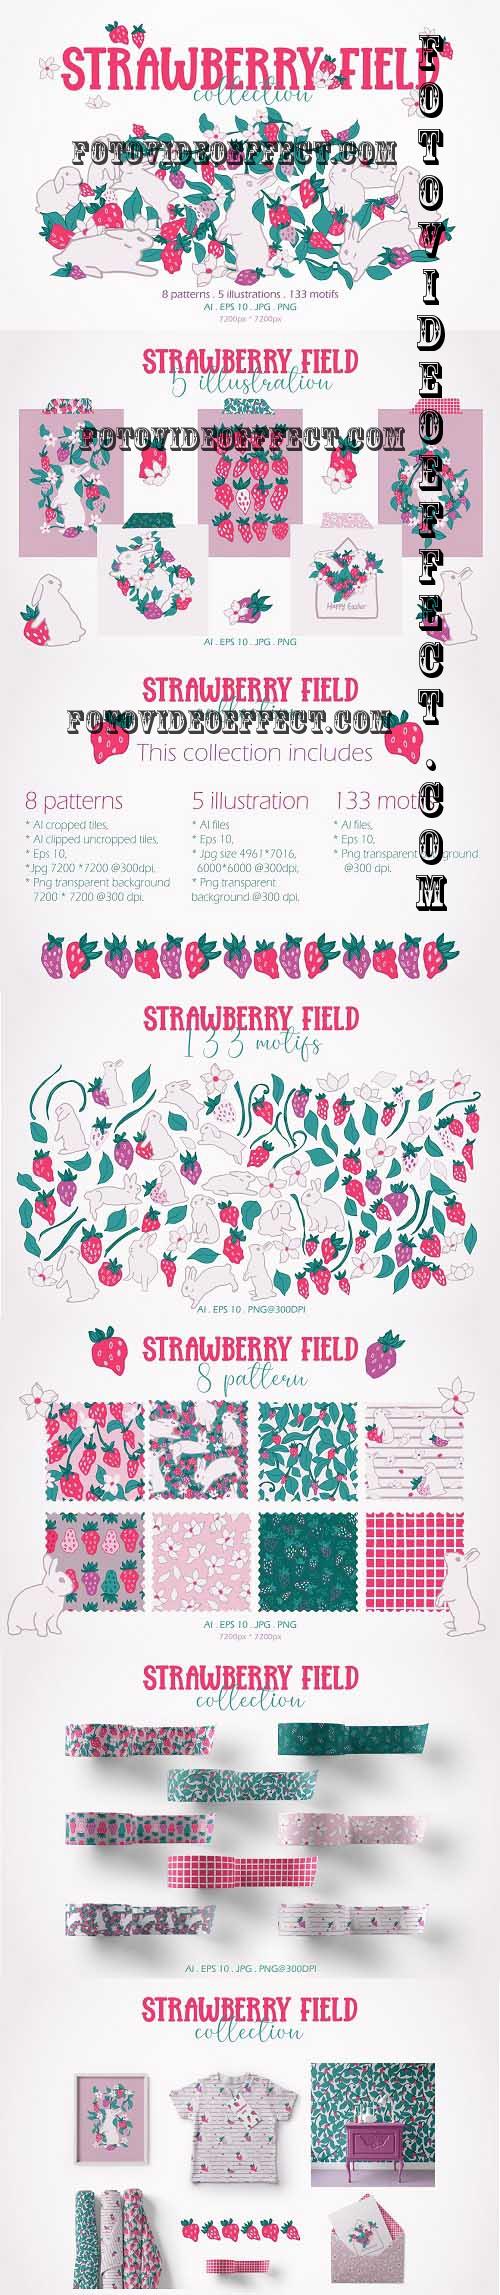 Strawberry Field Collection - 7083412